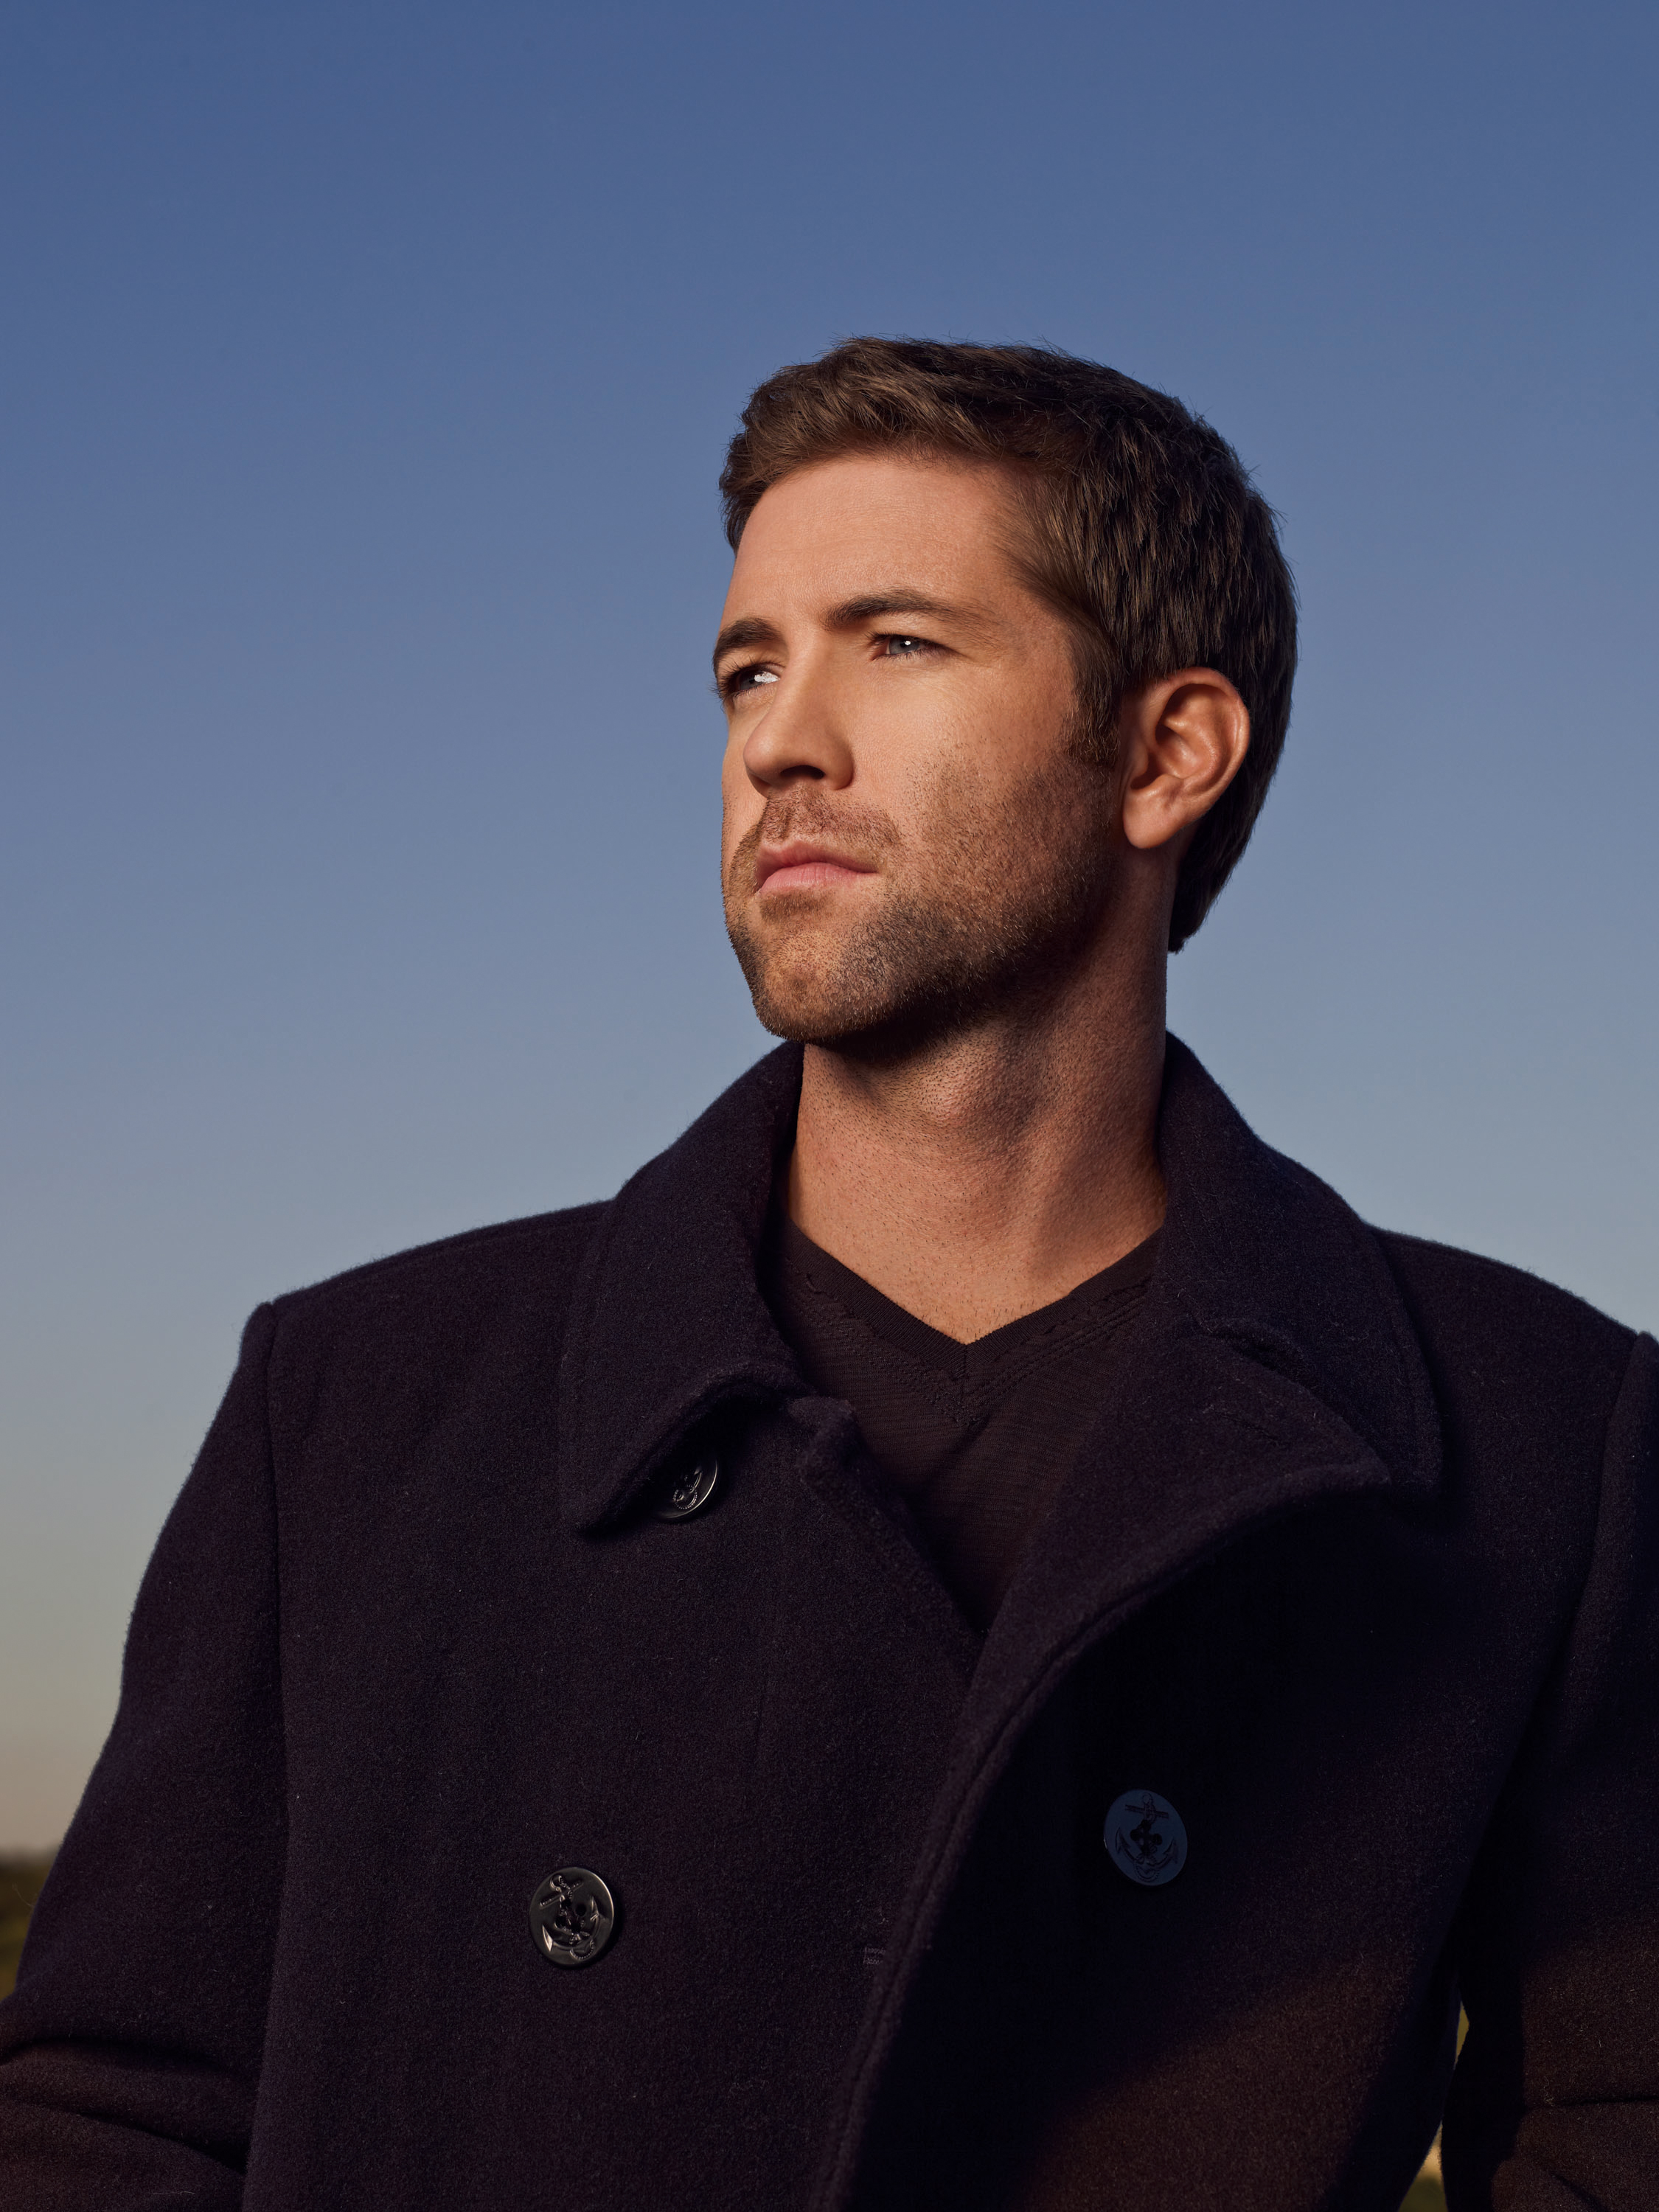 Backstage at the Grand Ole Opry, Josh Turner reveals the inspiration for hi...